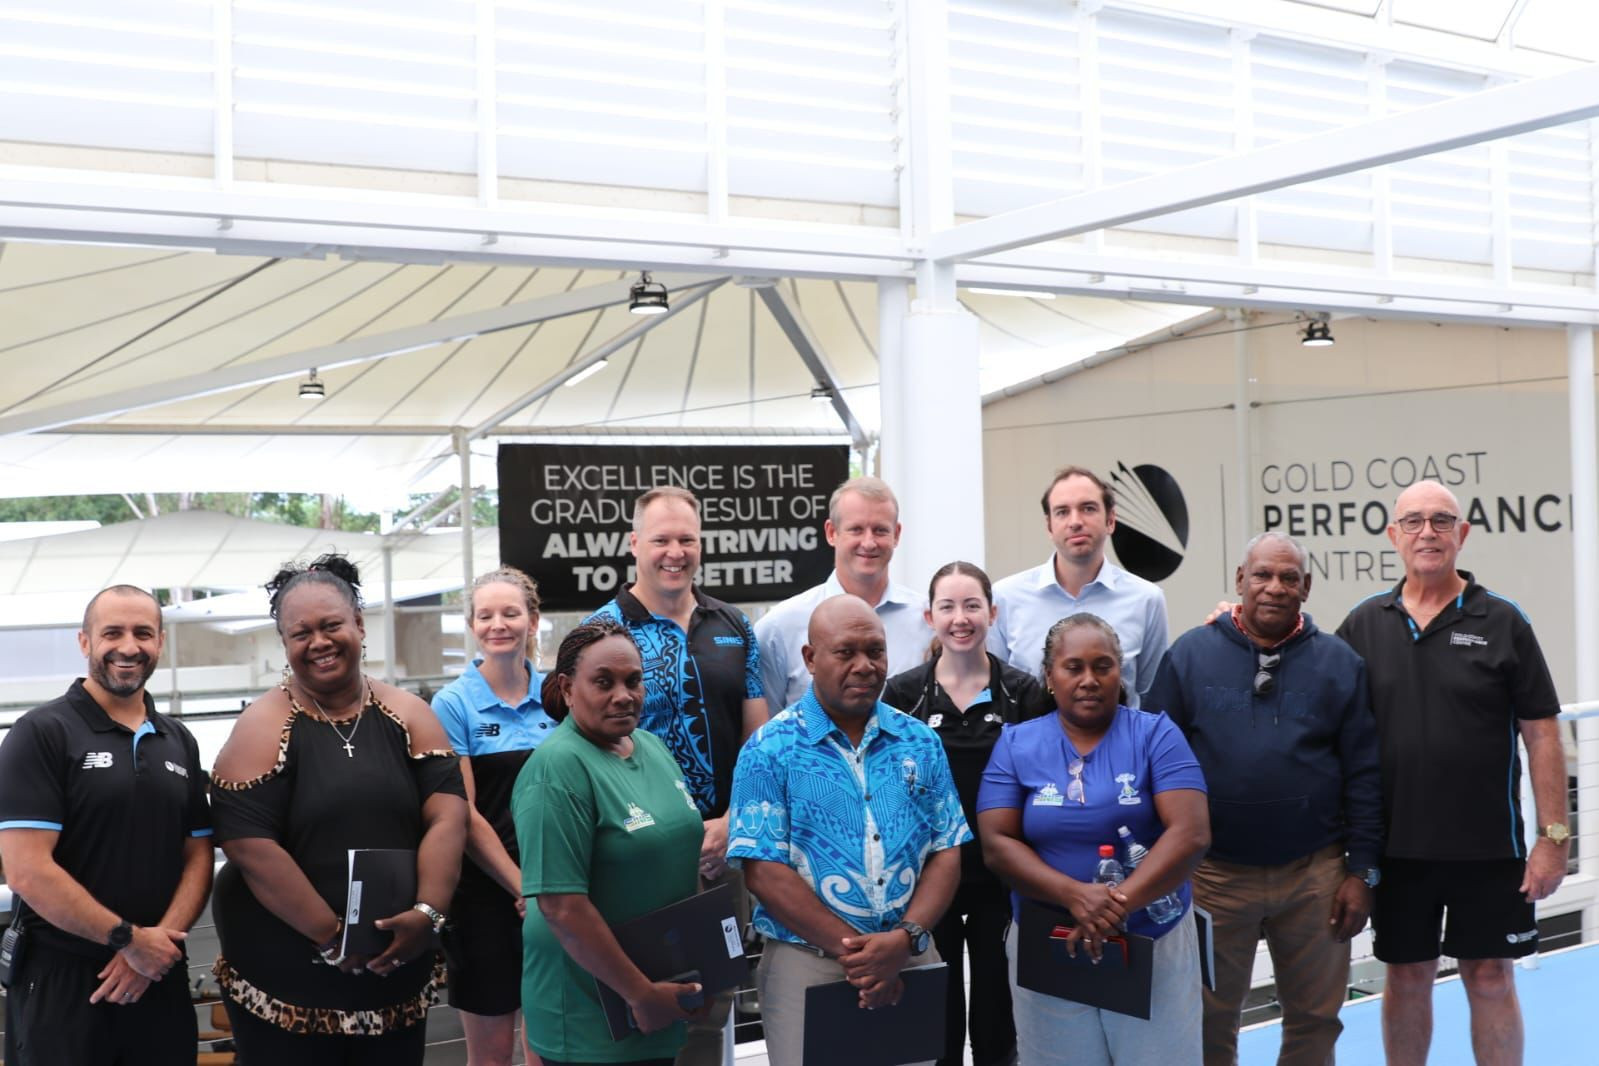 Solomon Islands athletes to train for 2023 Pacific Games in Gold Coast